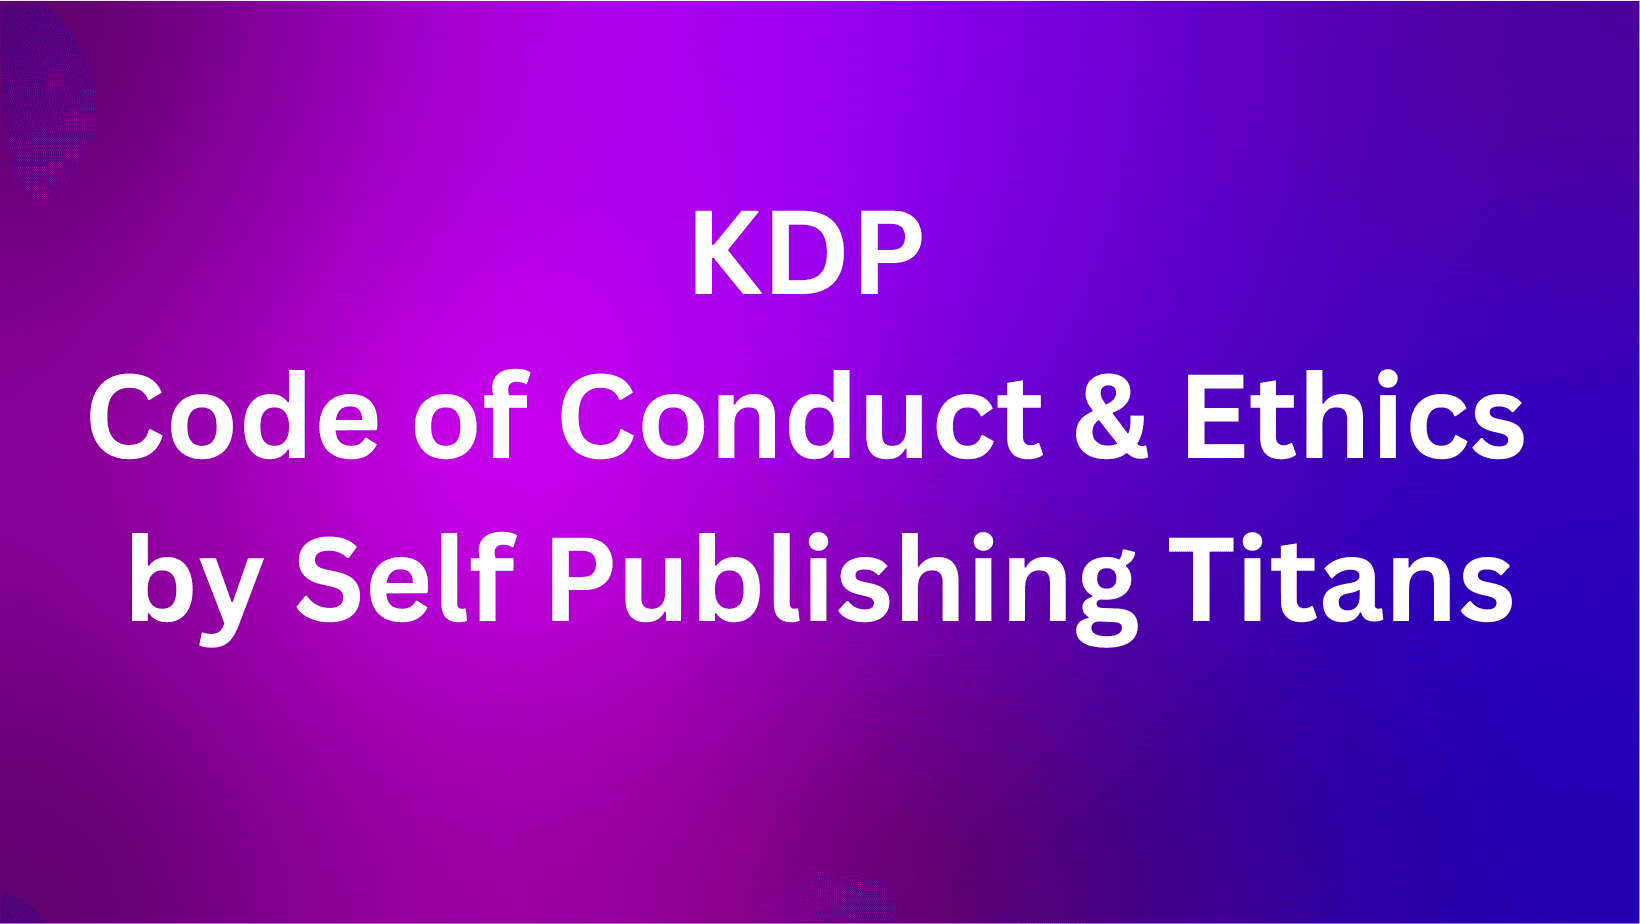 KDP Code of Conduct & Ethics by Self Publishing Titans